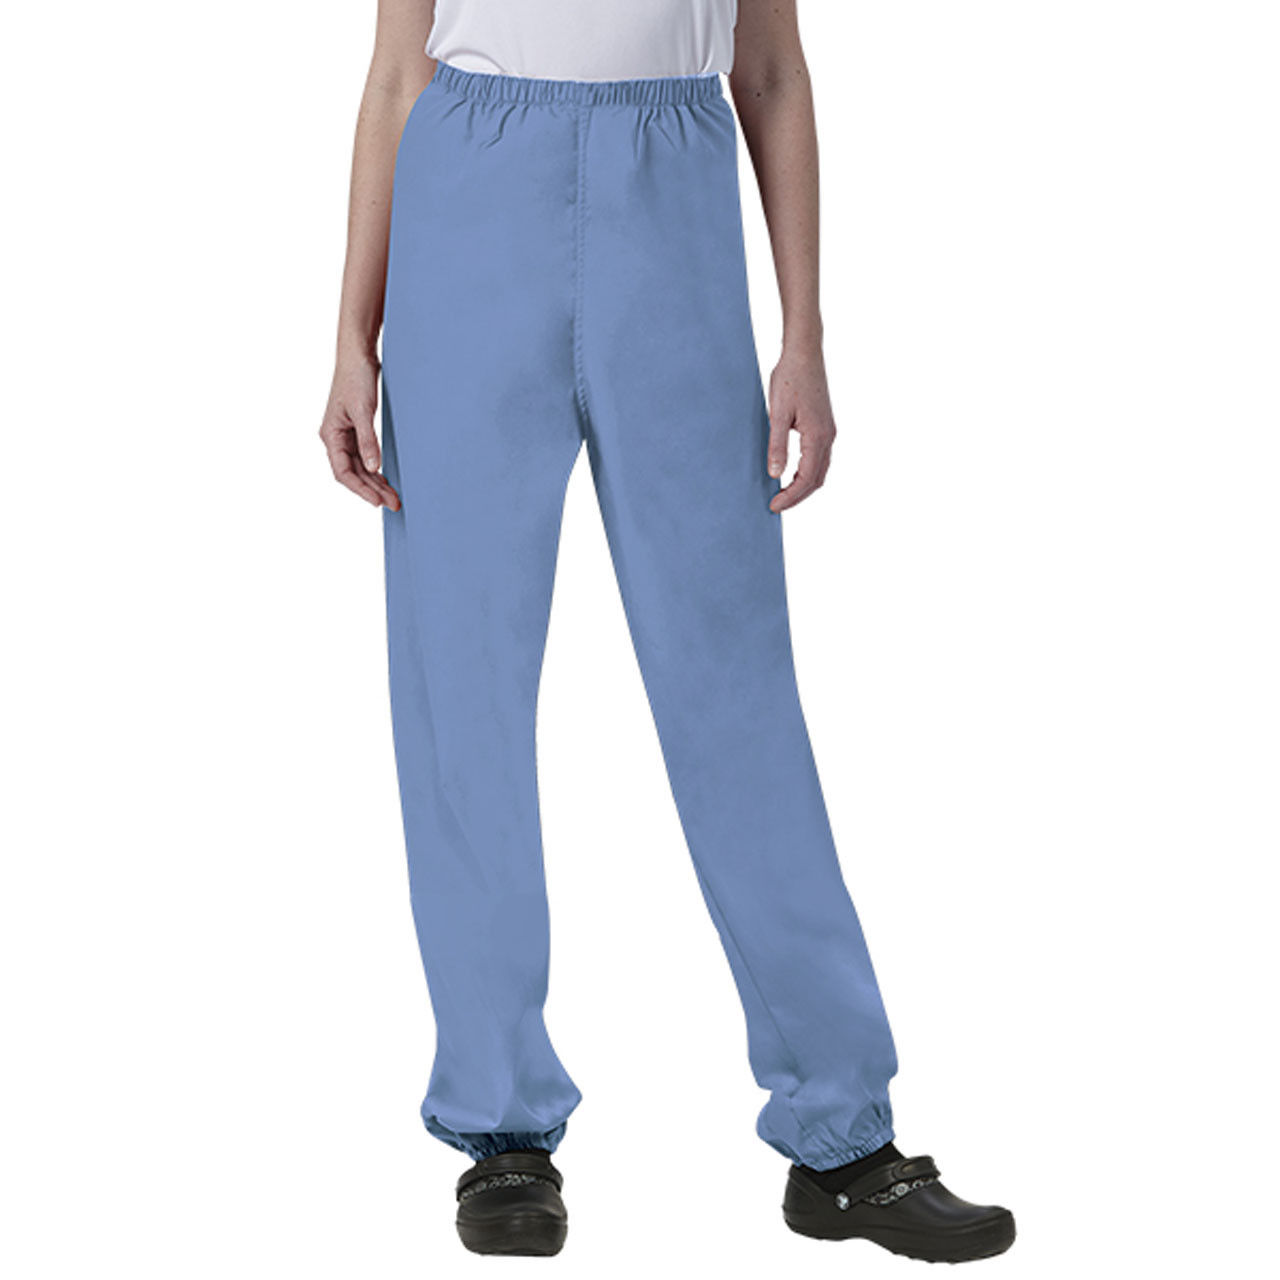 These scrub pants look good however do you sell wholesale nursing scrubs?